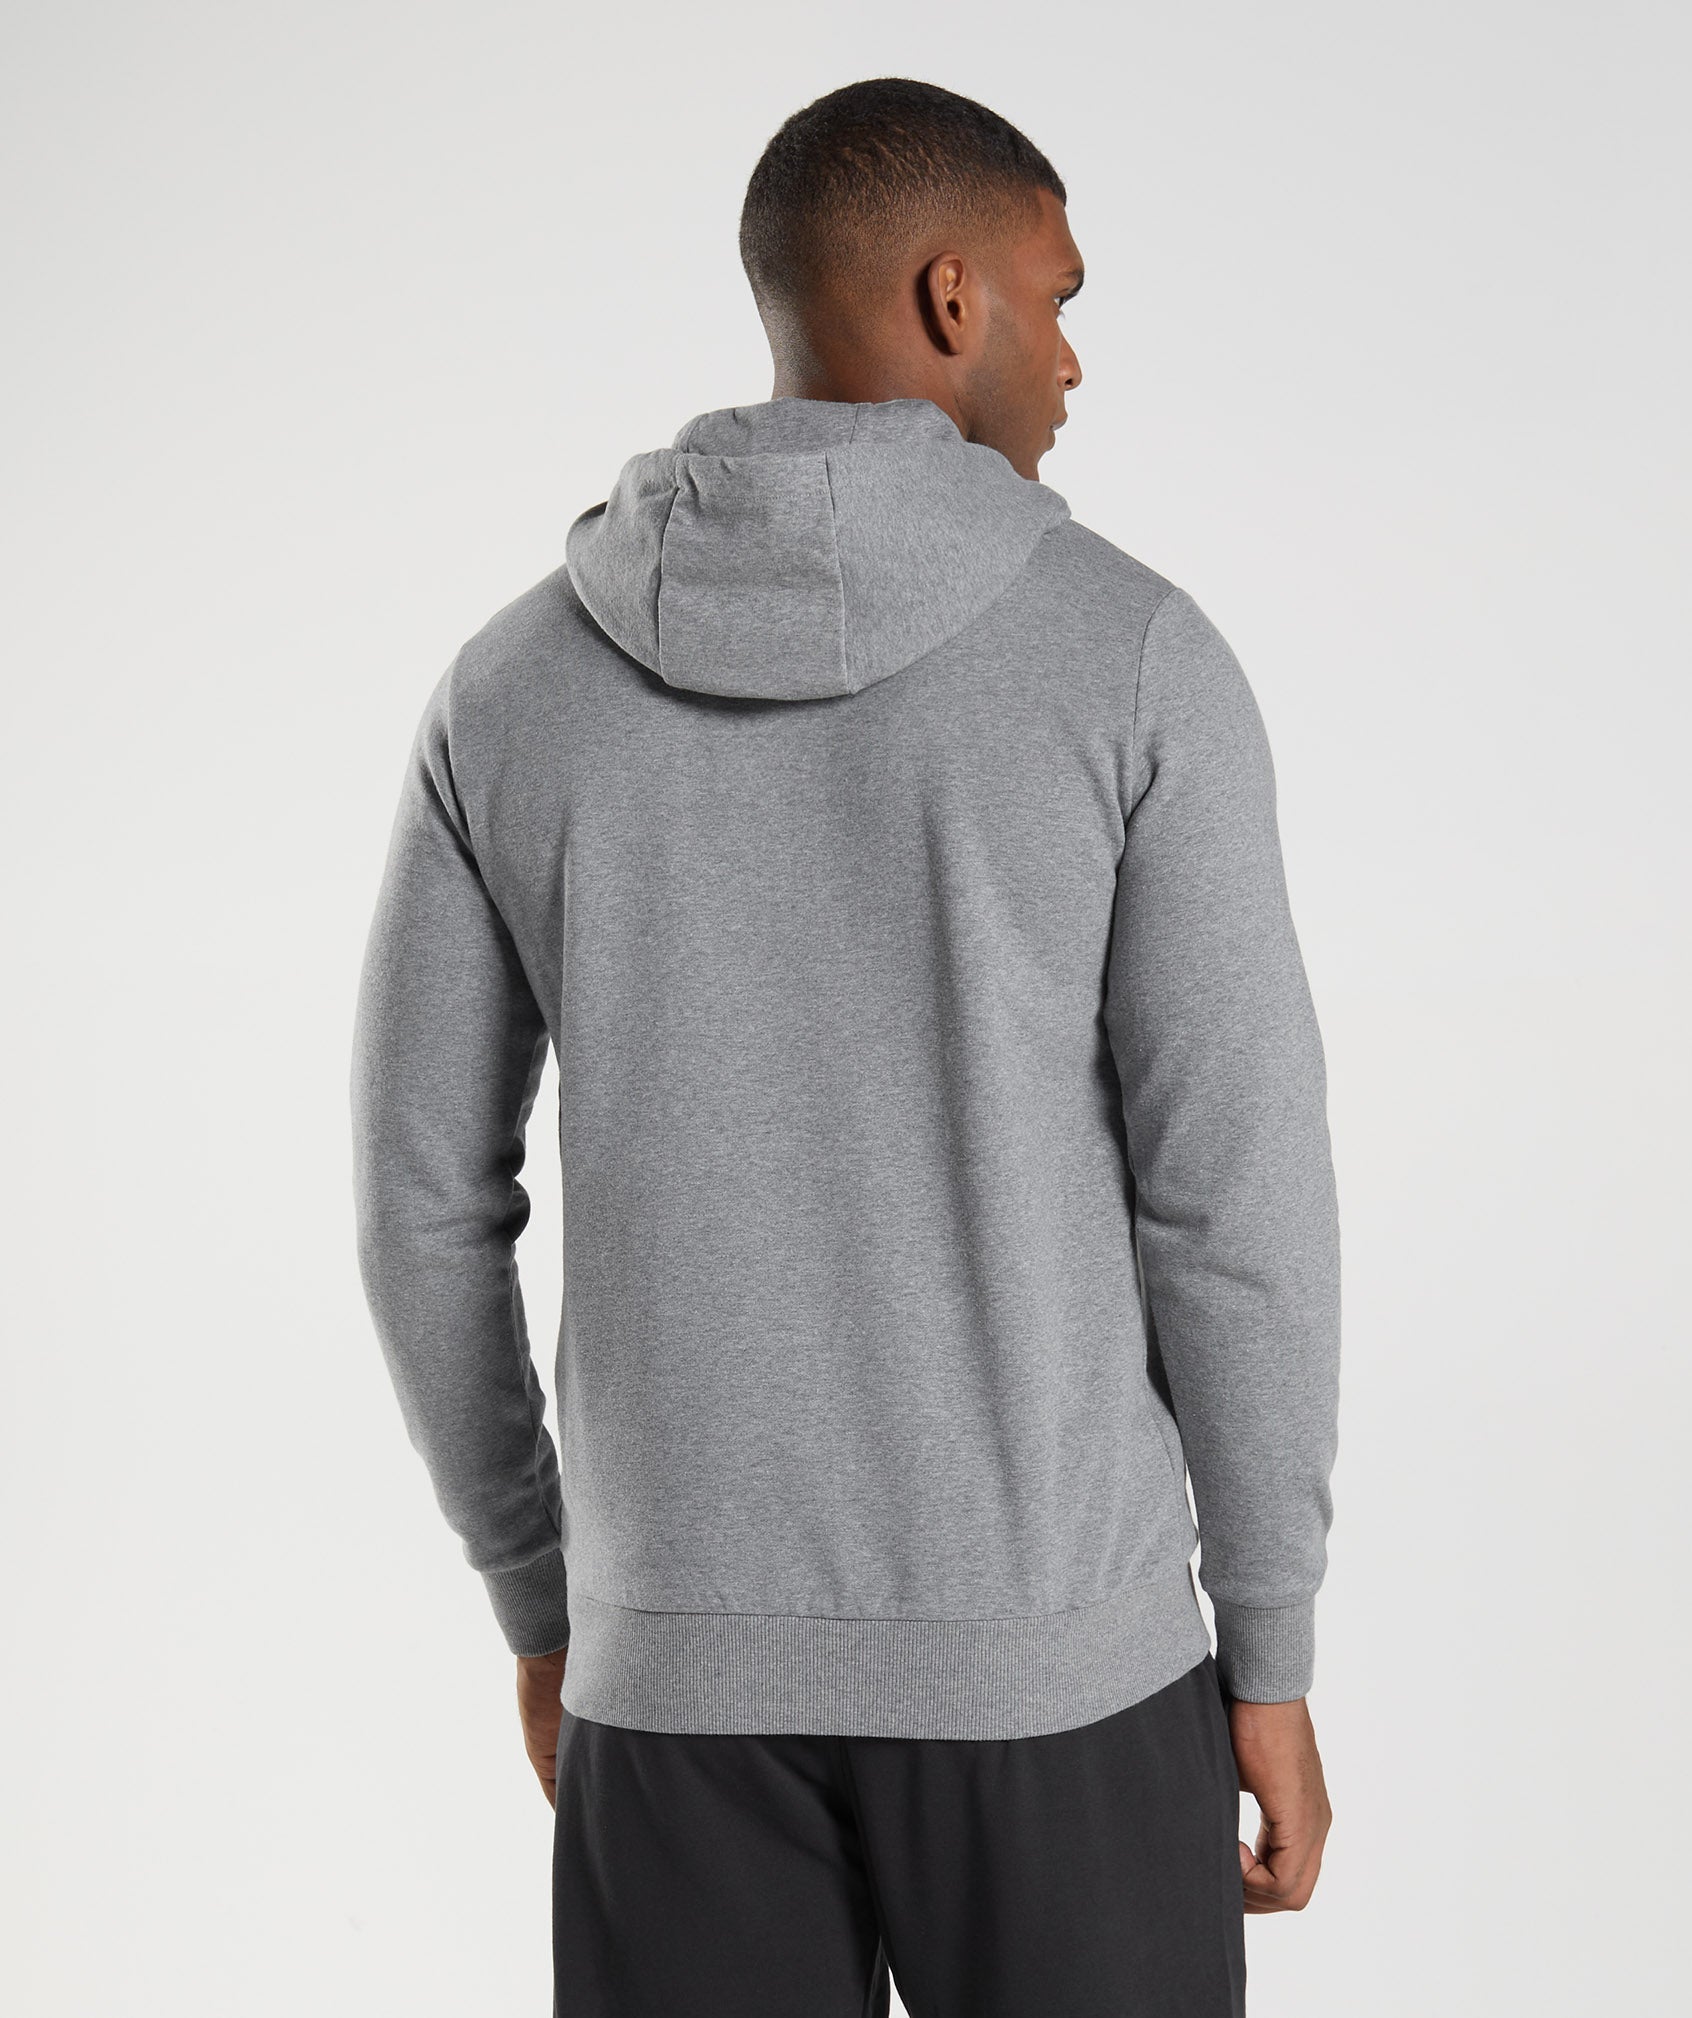 Sharkhead Infill Hoodie in Charcoal Grey Marl - view 2